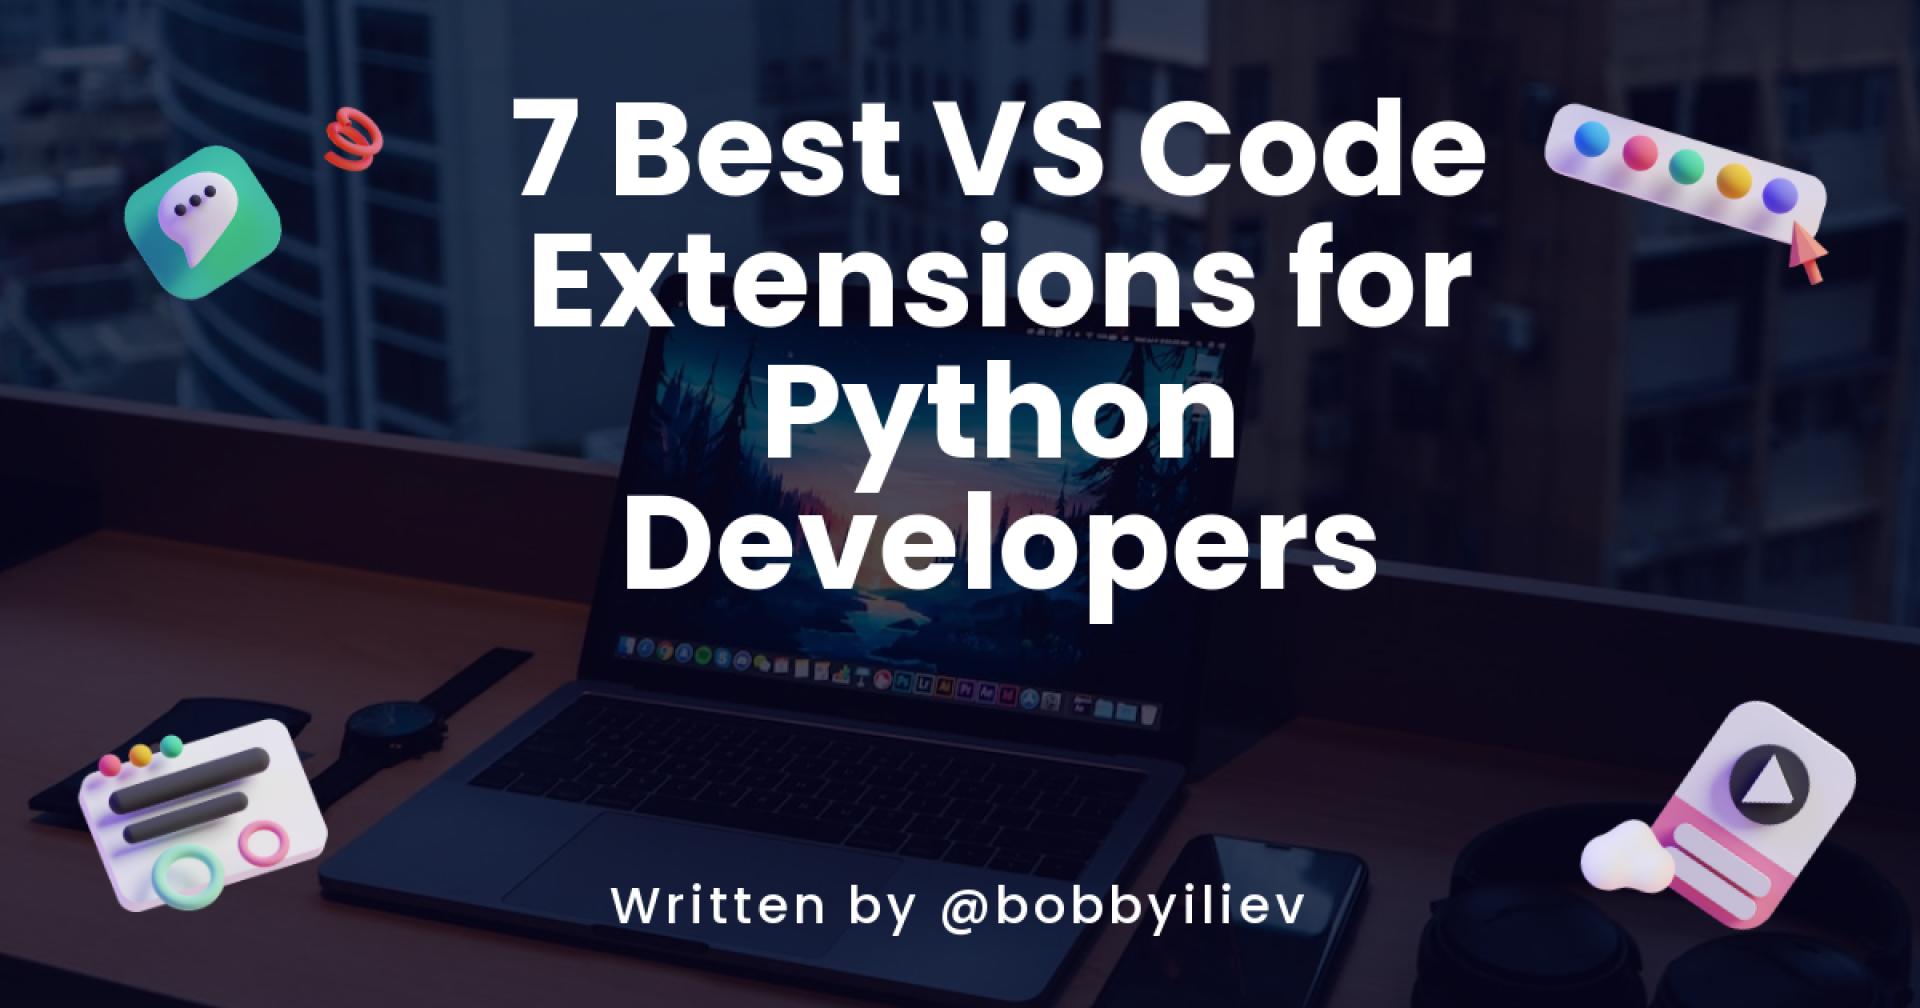 7 Best VS Code Extensions for Python Developers